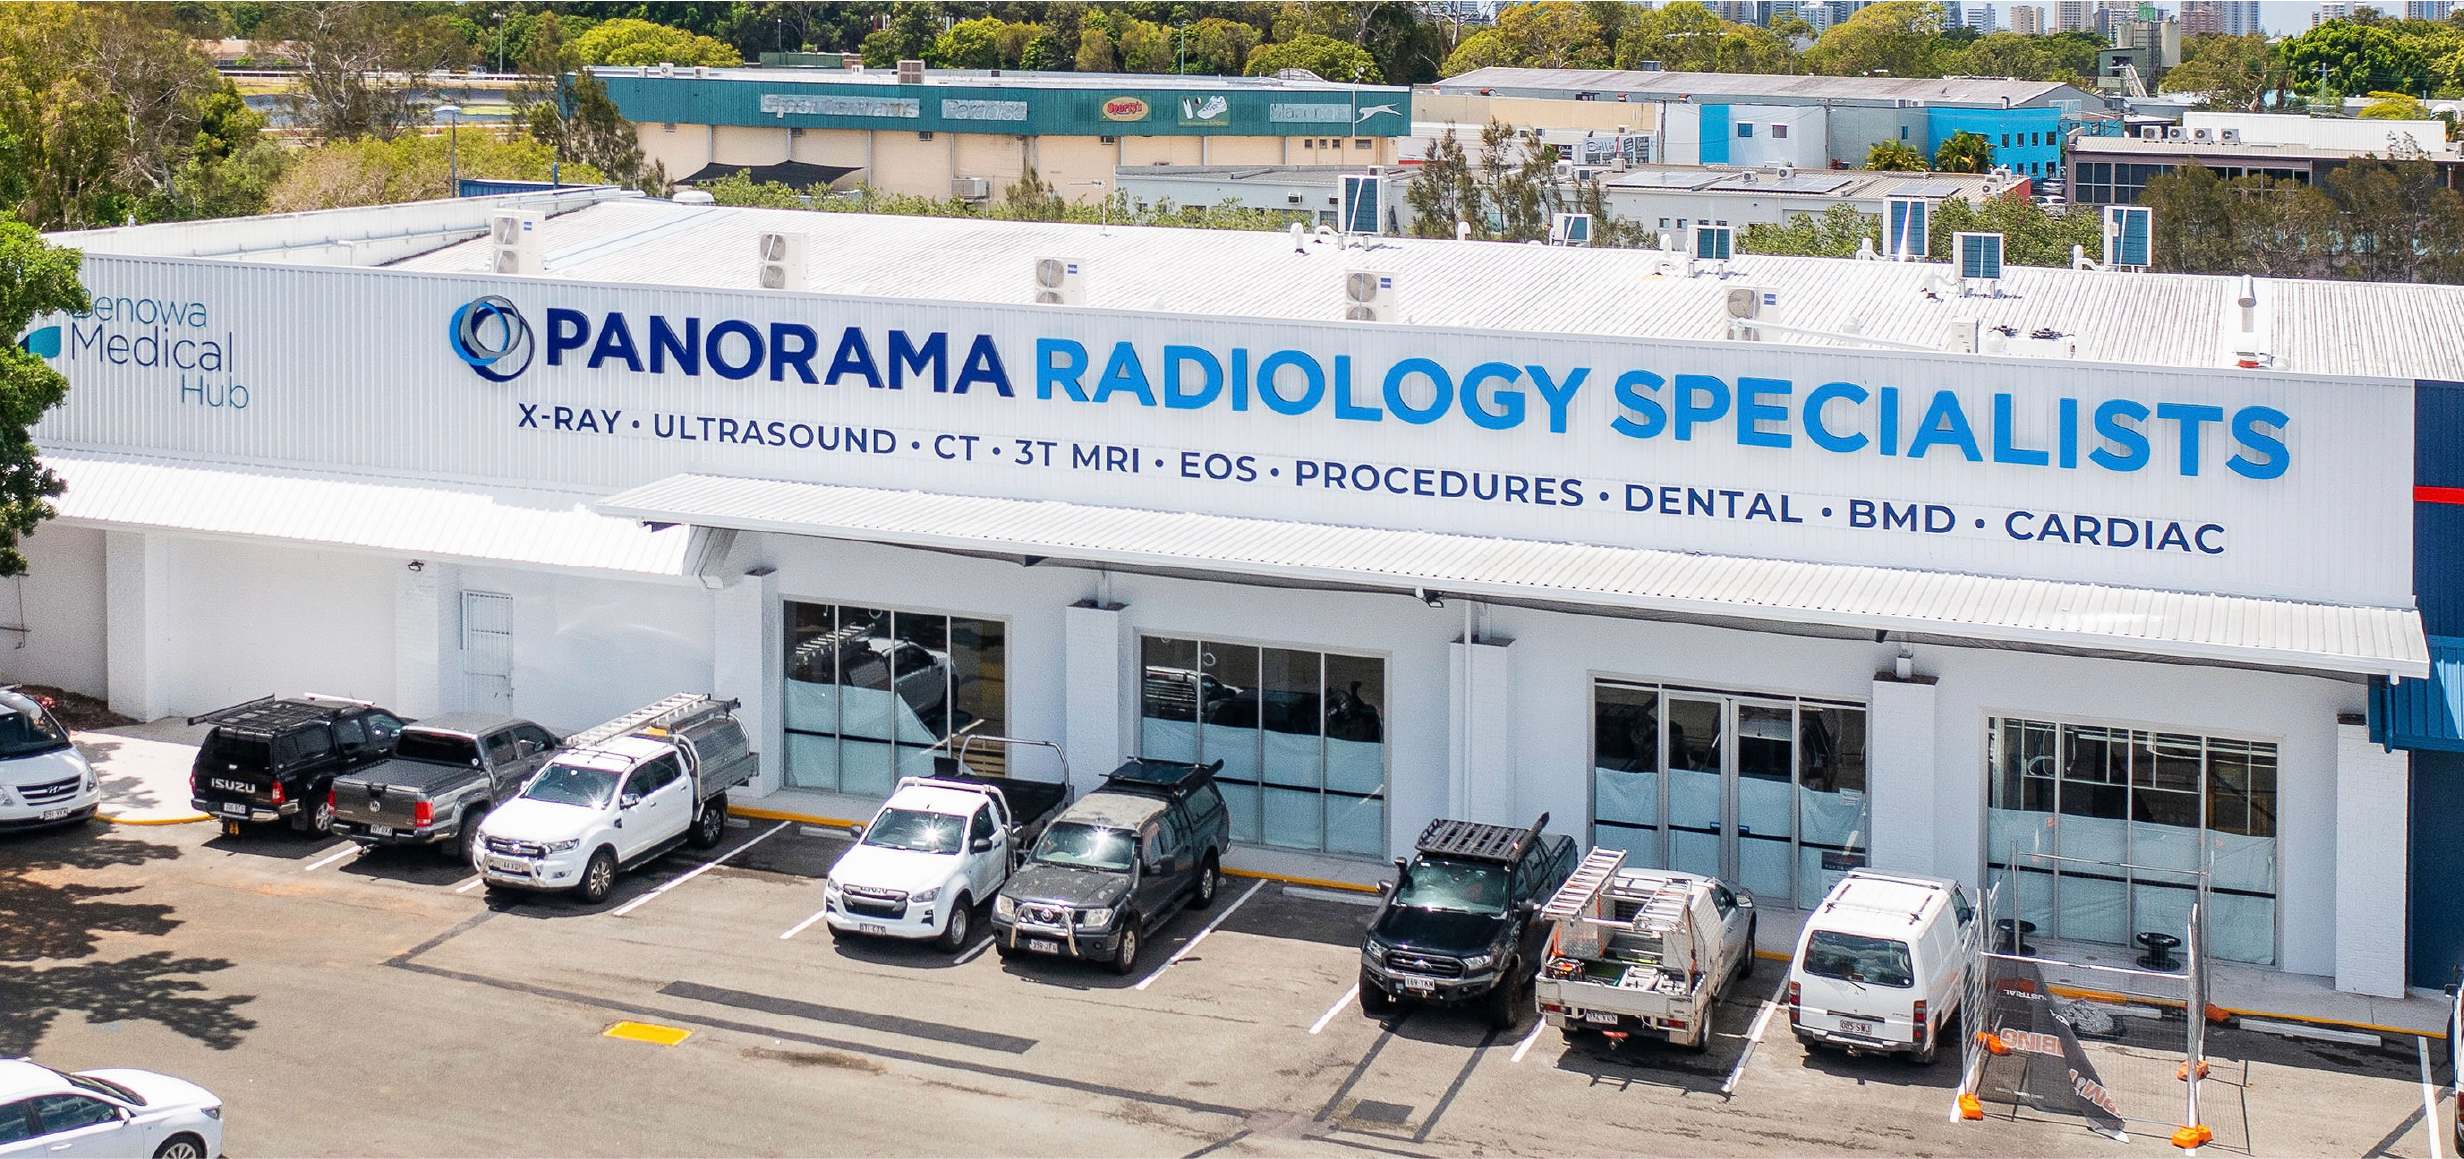 Panorama Radiology Specialists Entrance Signage